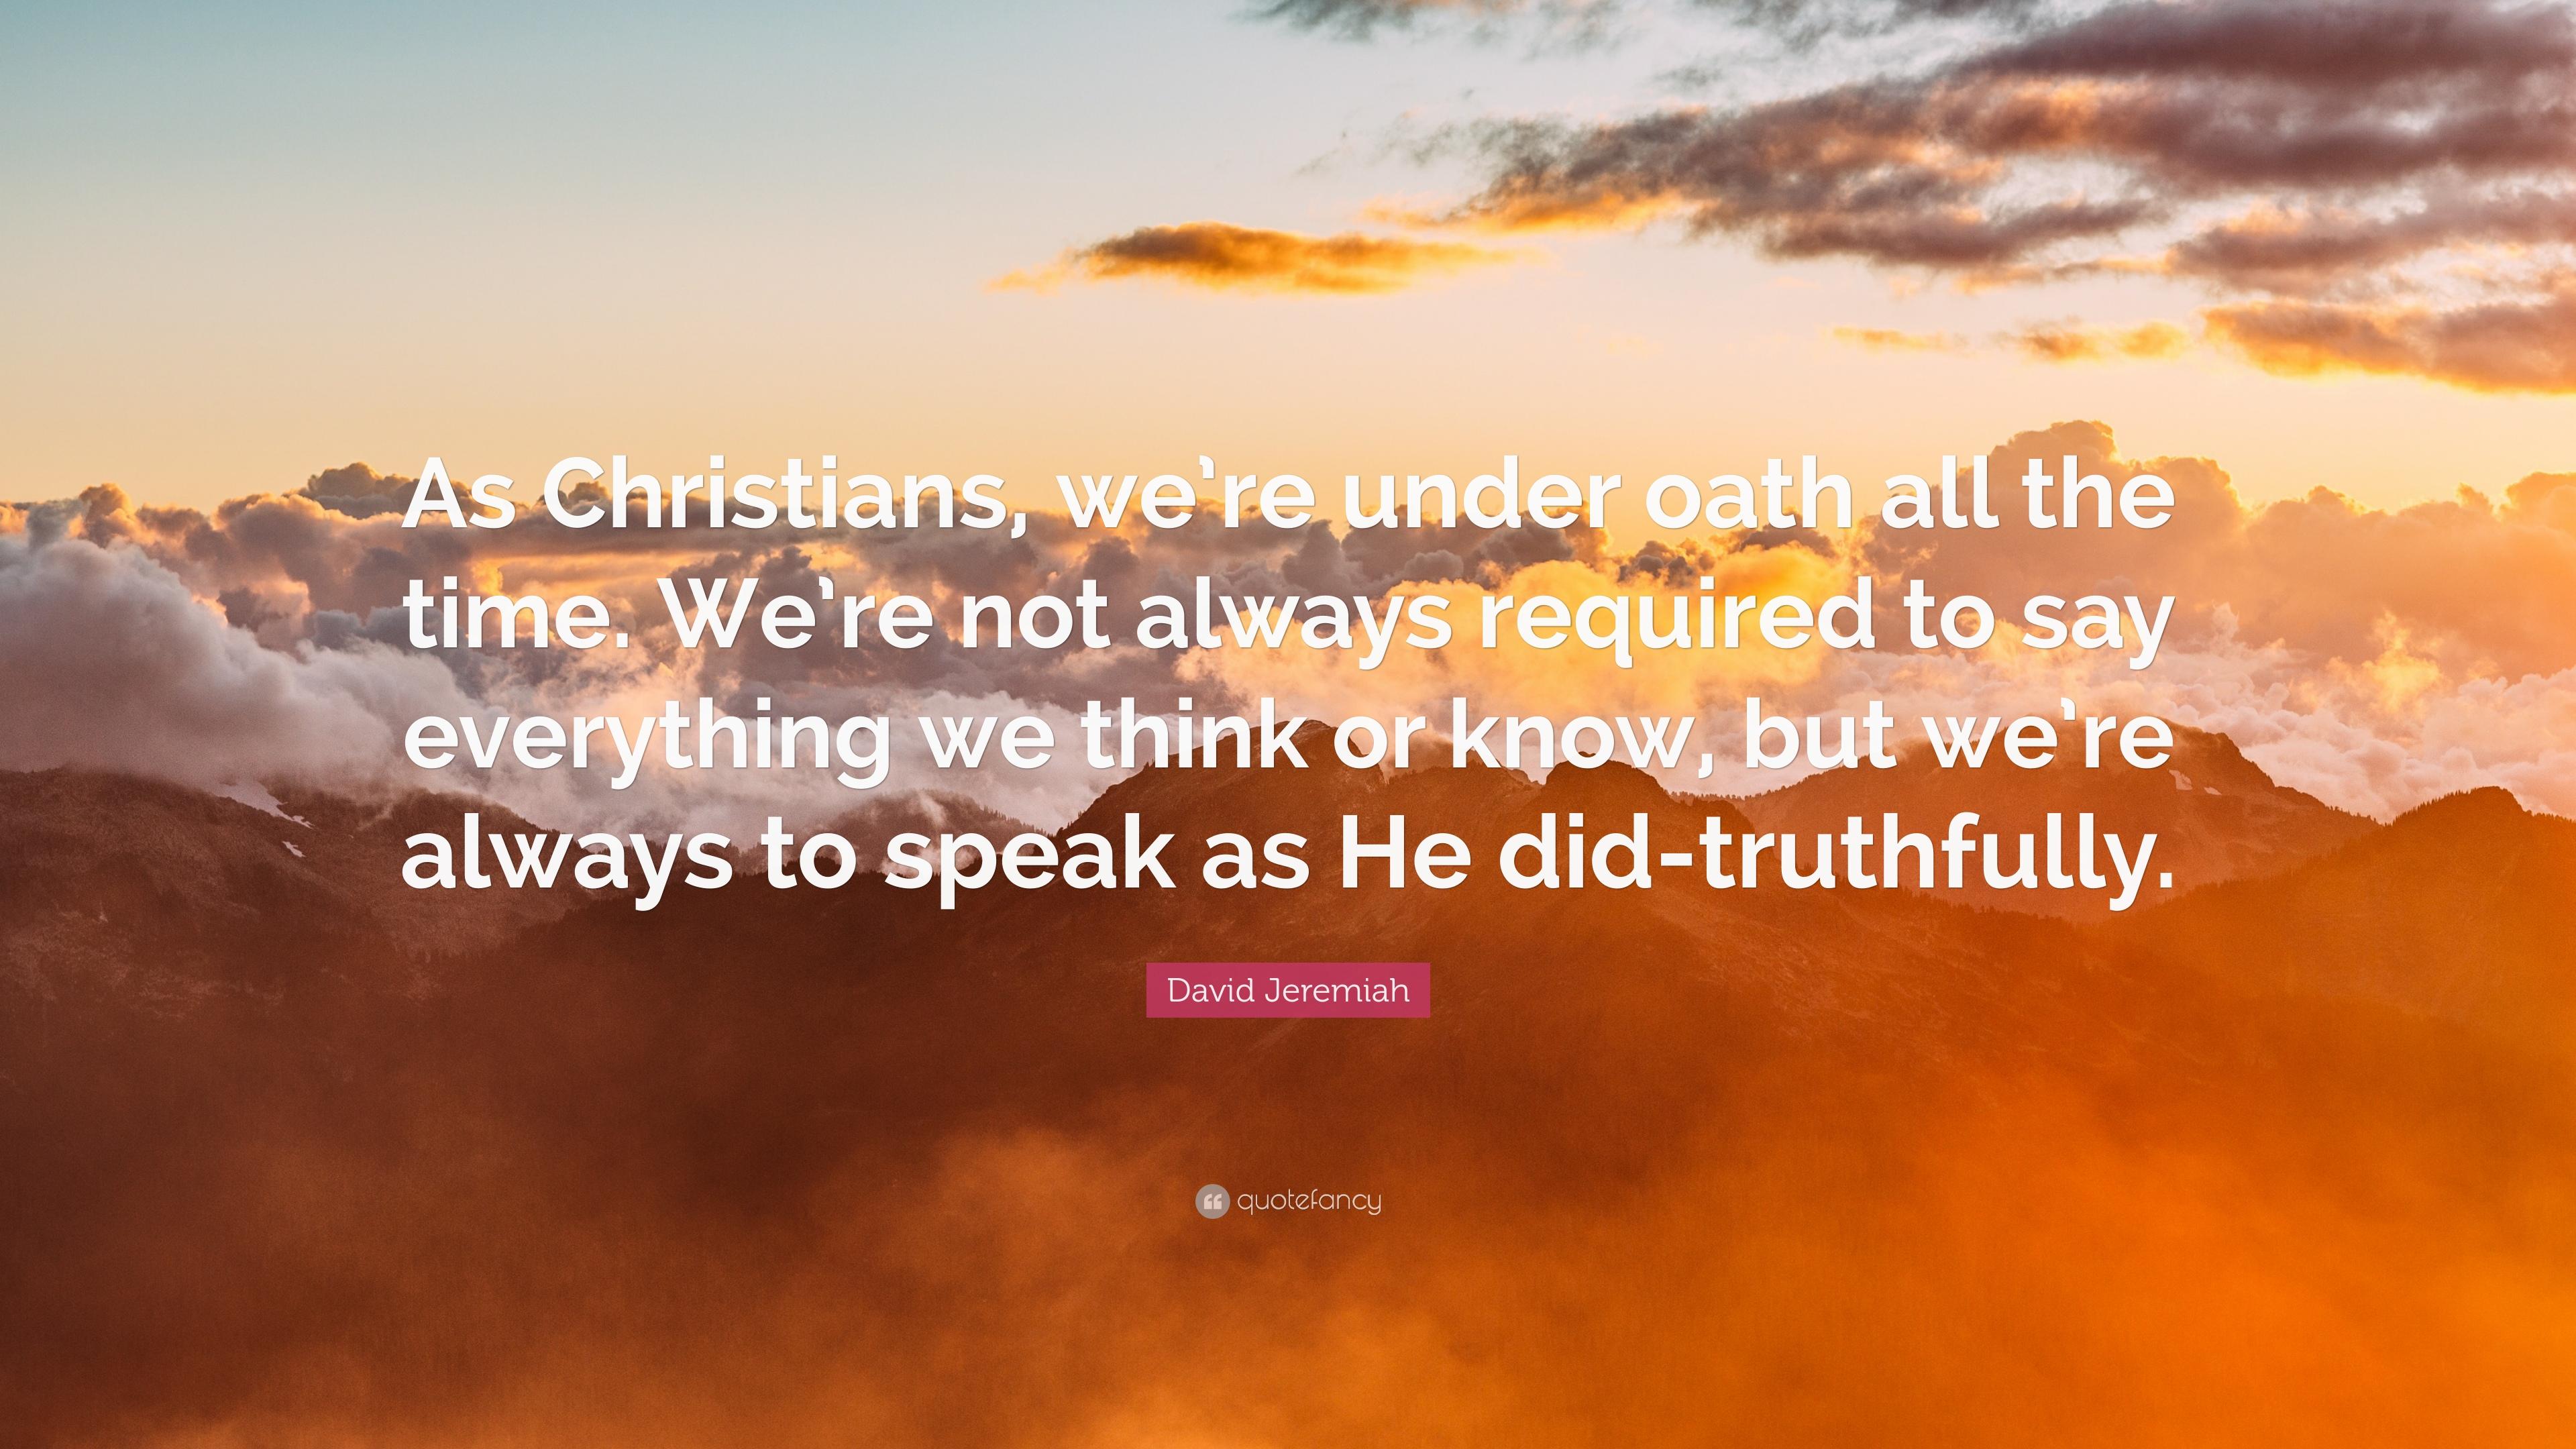 David Jeremiah Quote: “As Christians, we're under oath all the time